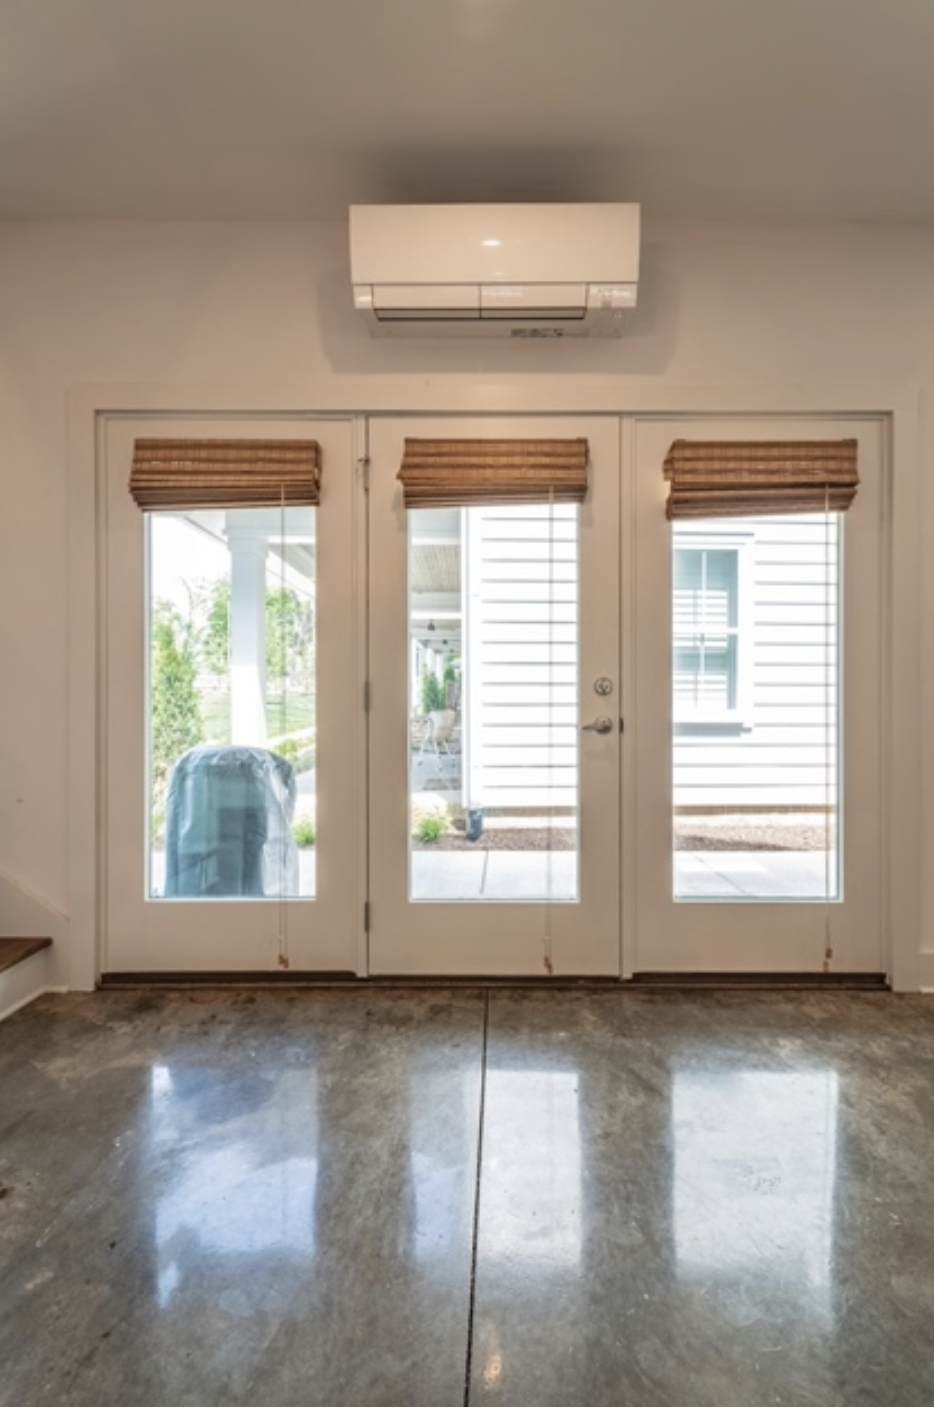 Image of french doors with a wall-mounted unit hanging above